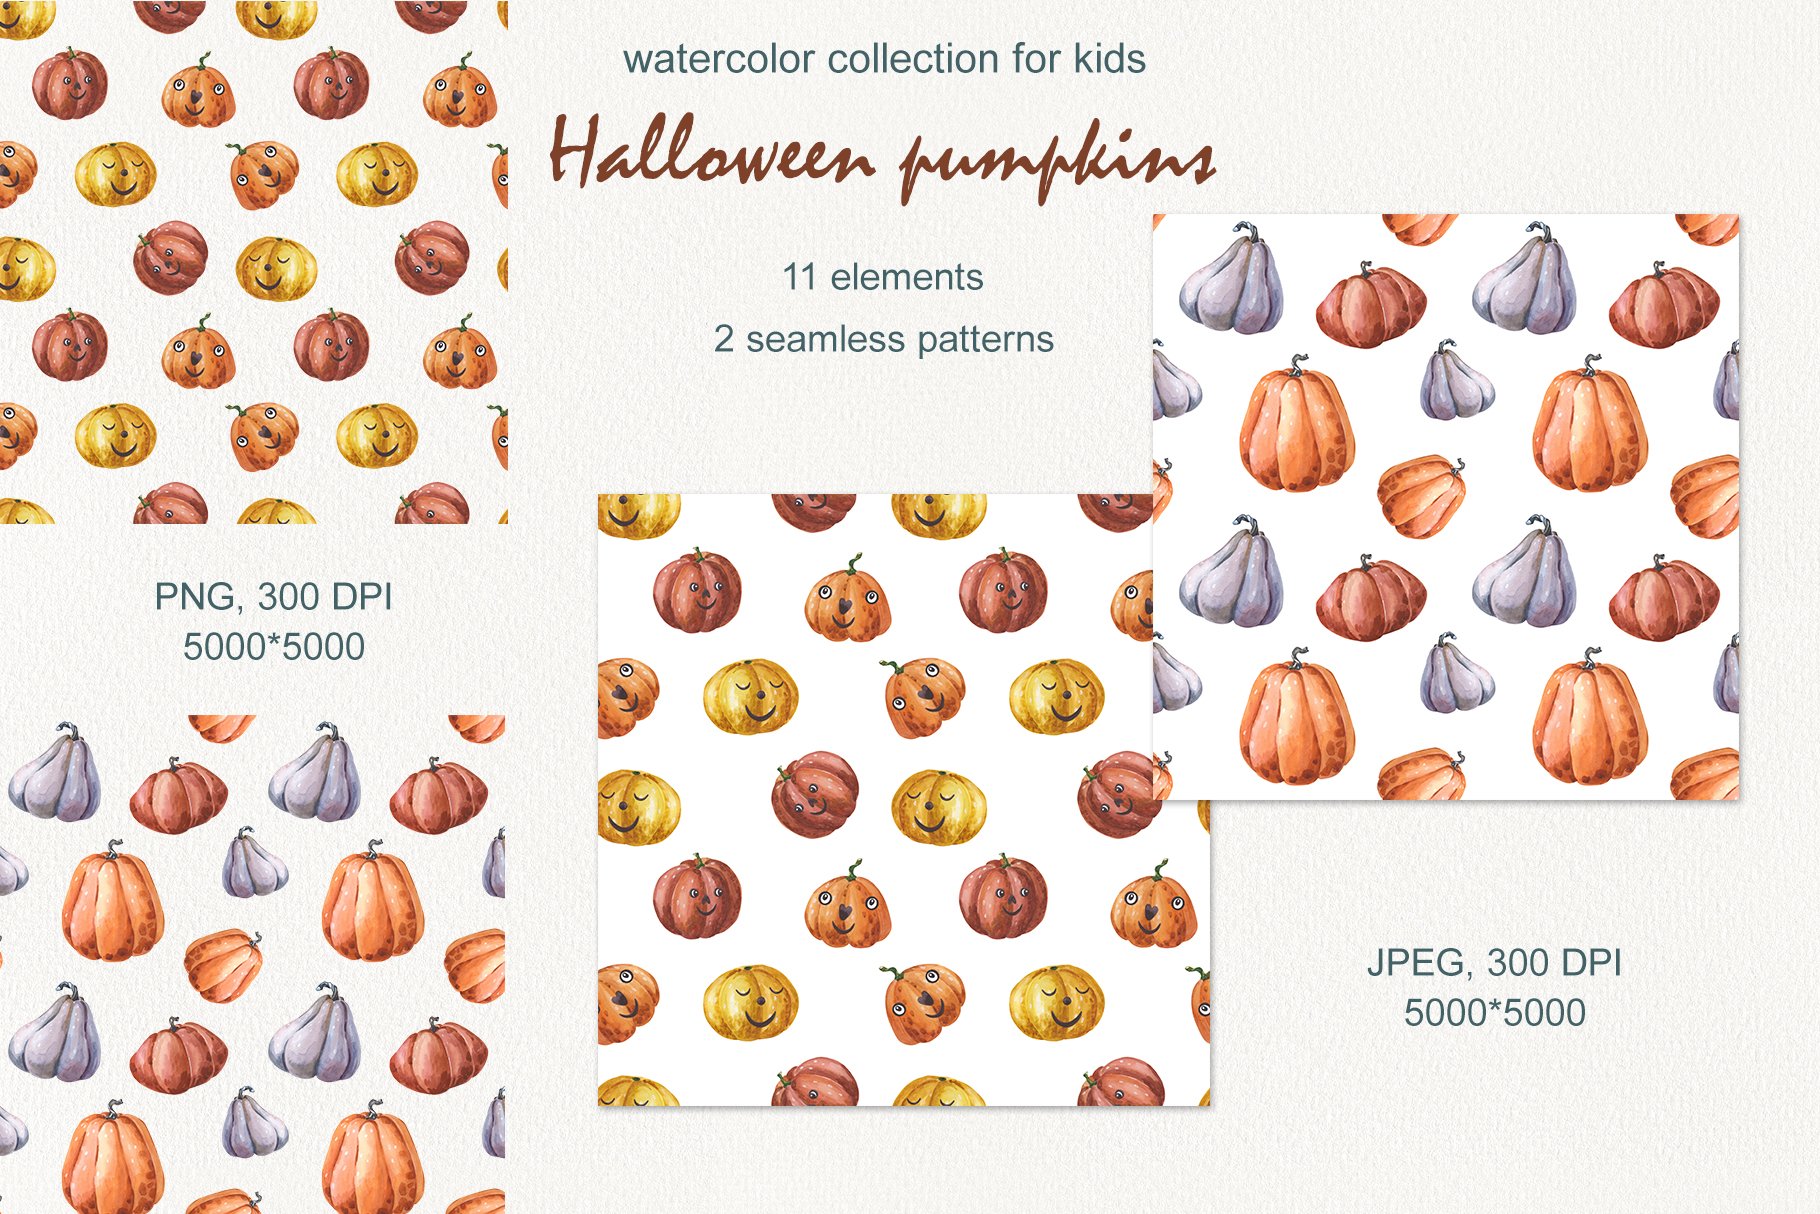 Patterns options with pumpkins and other autumn elements.